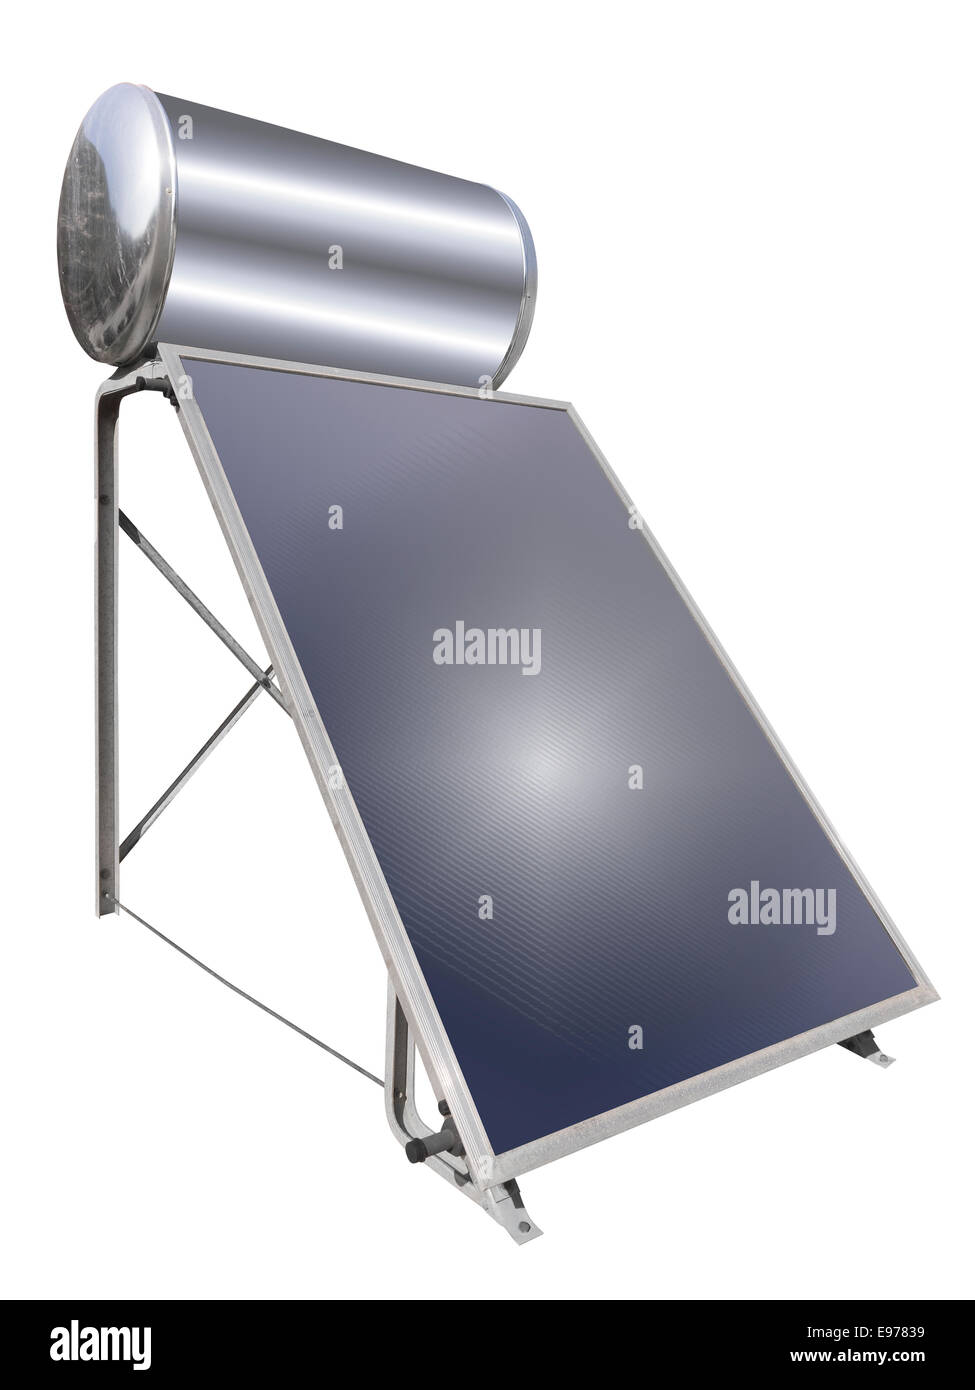 Solar water heater used on house roofs in warm climates, isolated Stock Photo